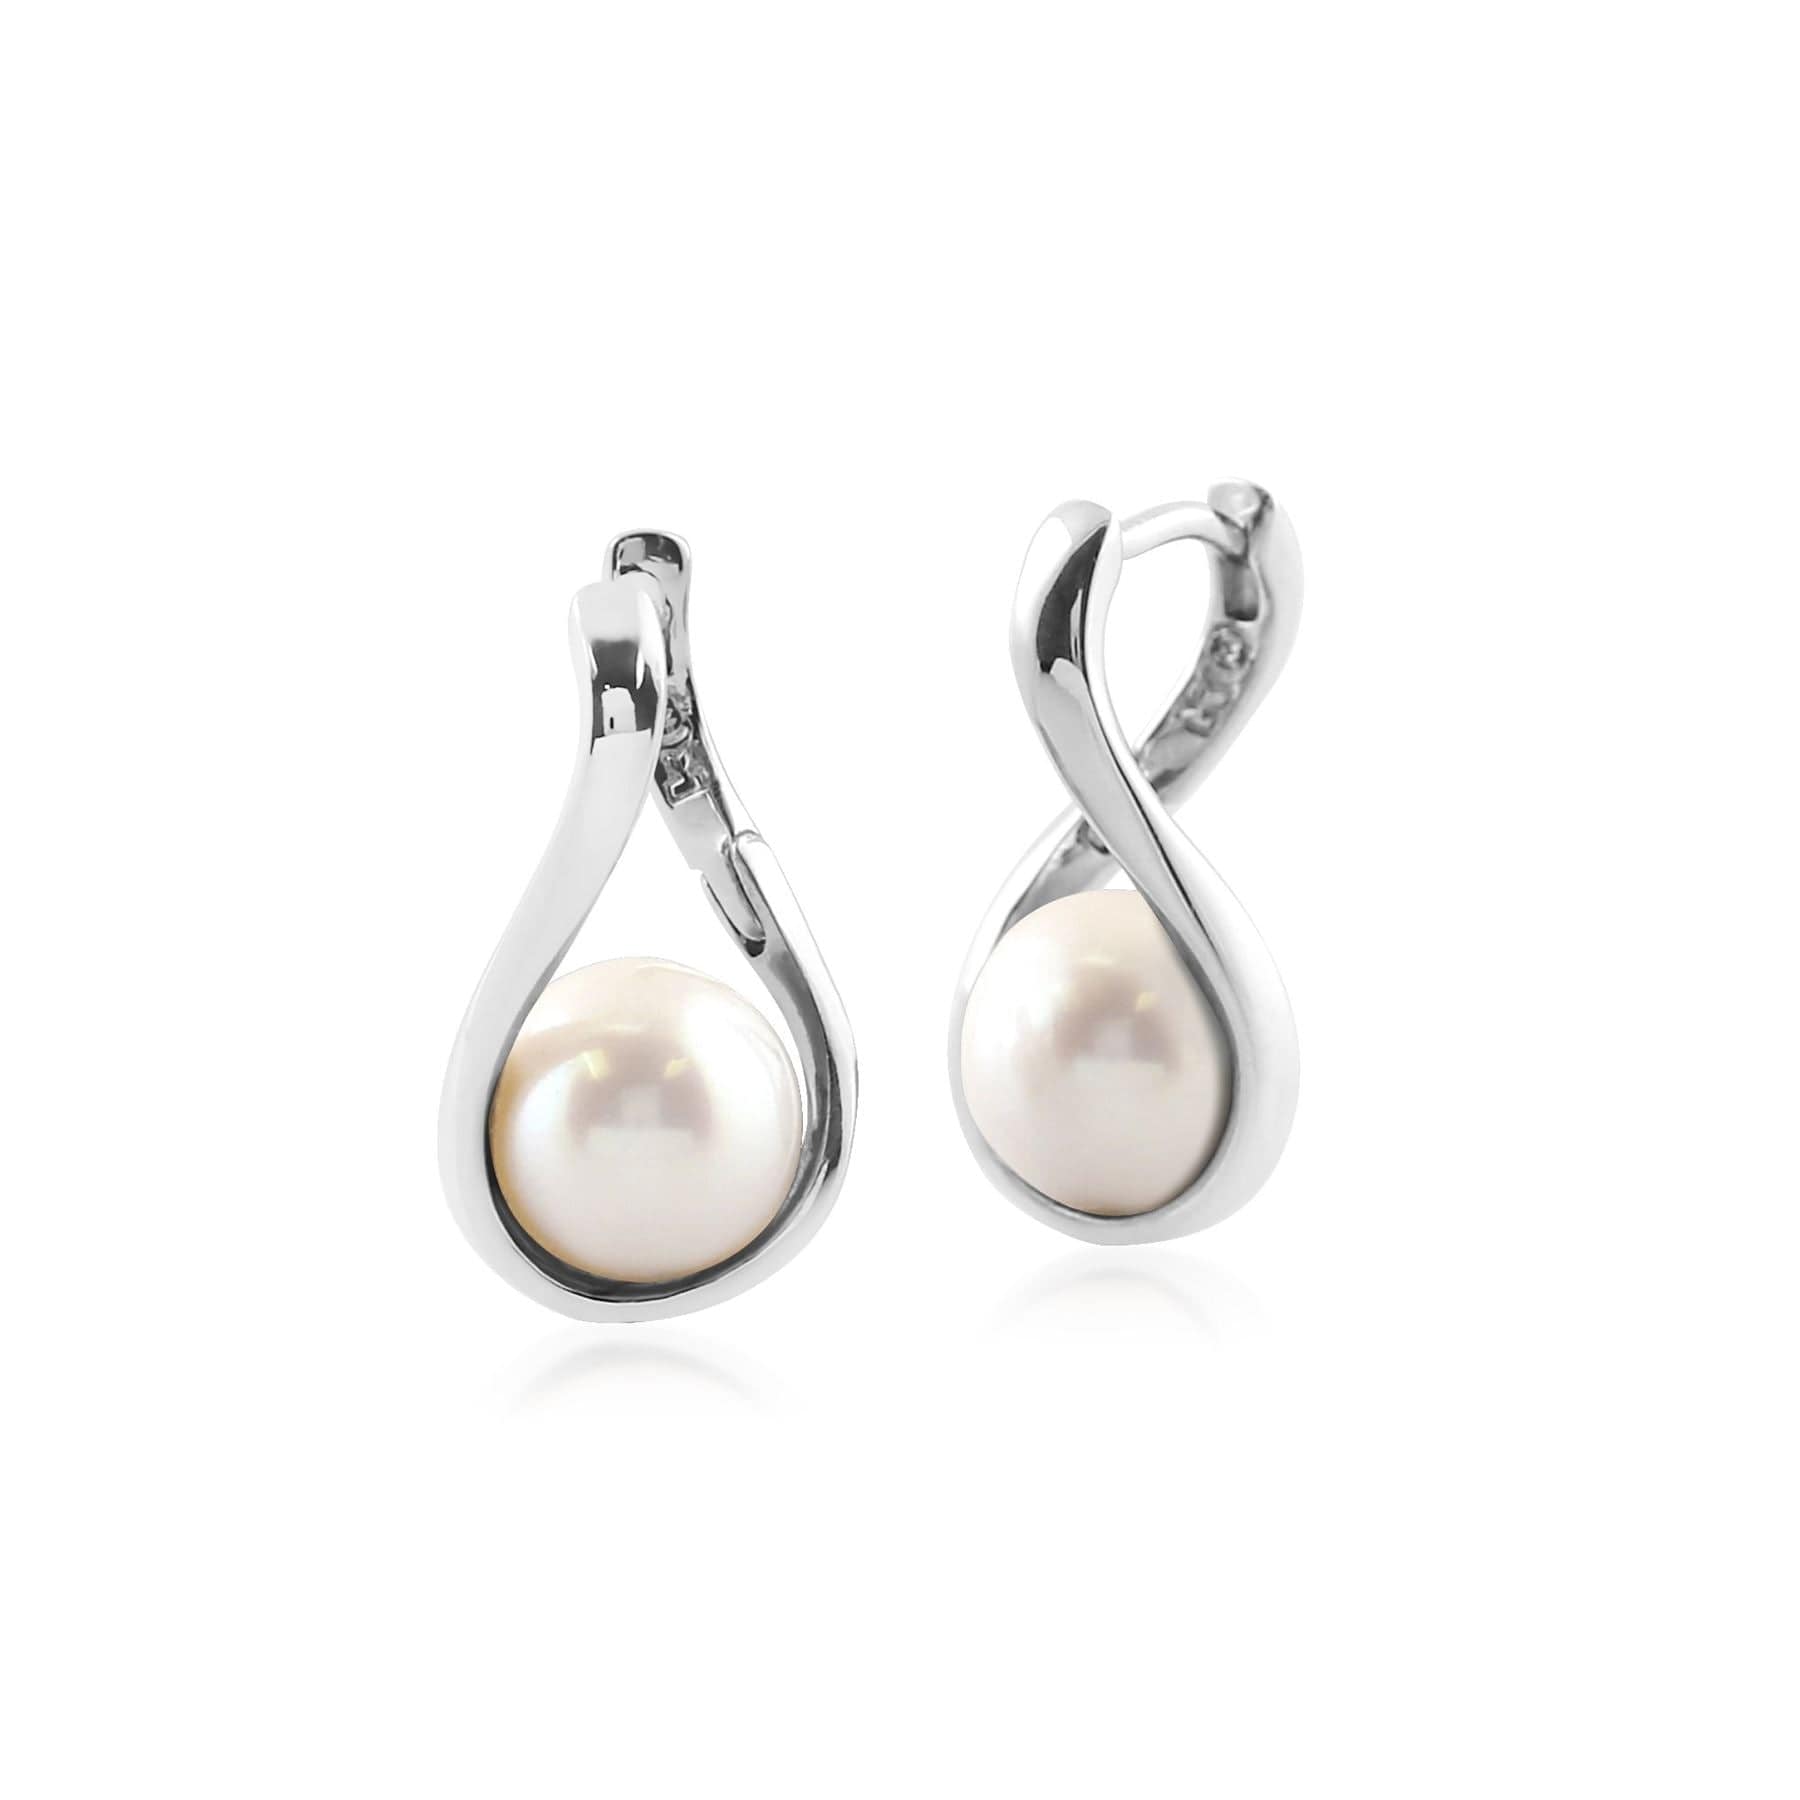 T0953E90/46 Kosmos Pearl Orb Earrings in Rhodium Plated Sterling Silver 1